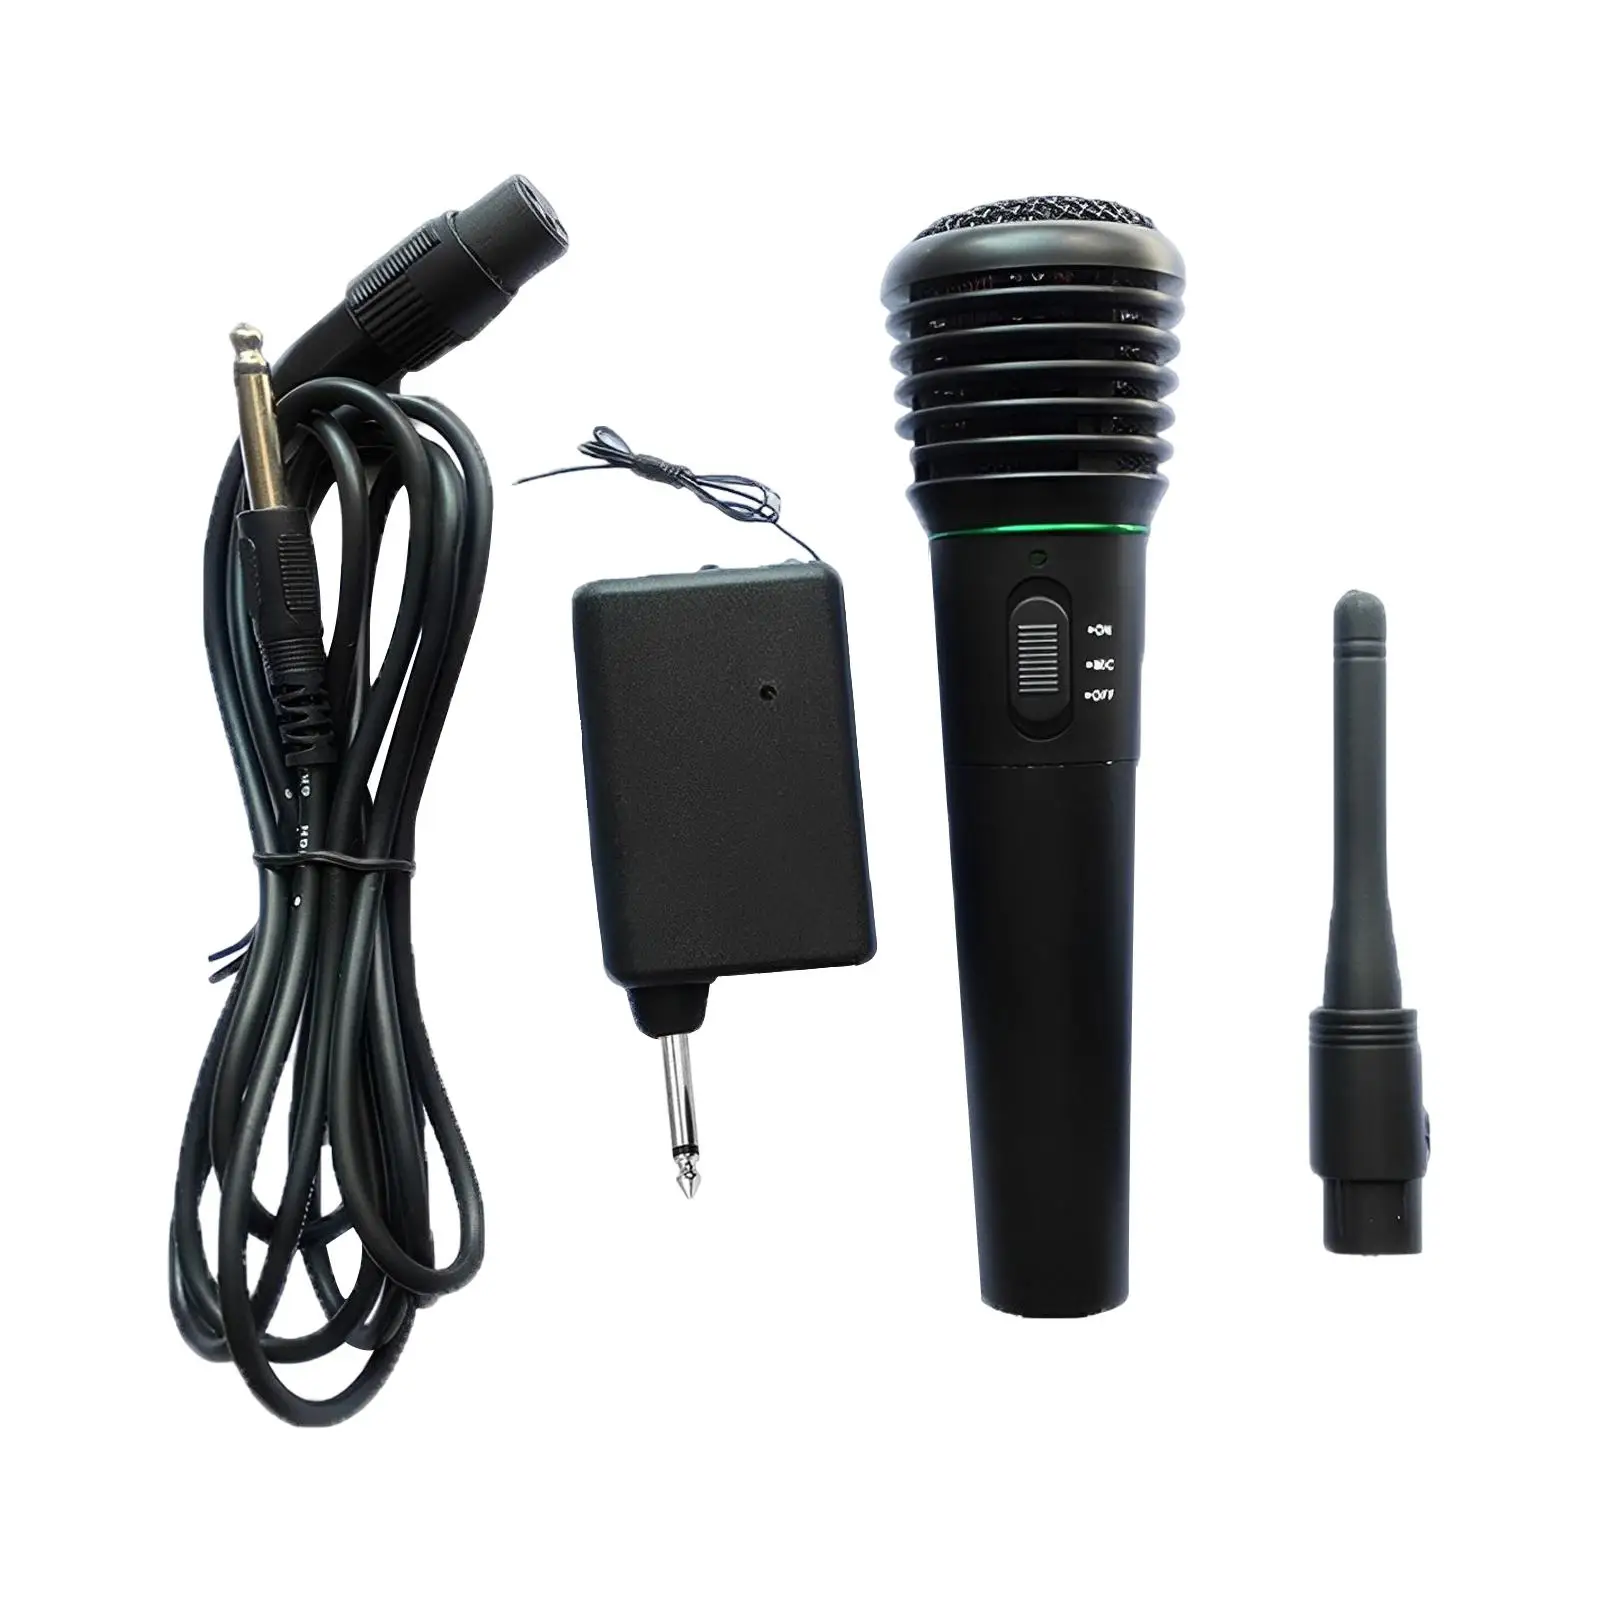 Wired Dynamic Mic Dual Usages Mini Portable Receiver Cordless Microphone for Audio Family Party Amplifie Tablet Computer